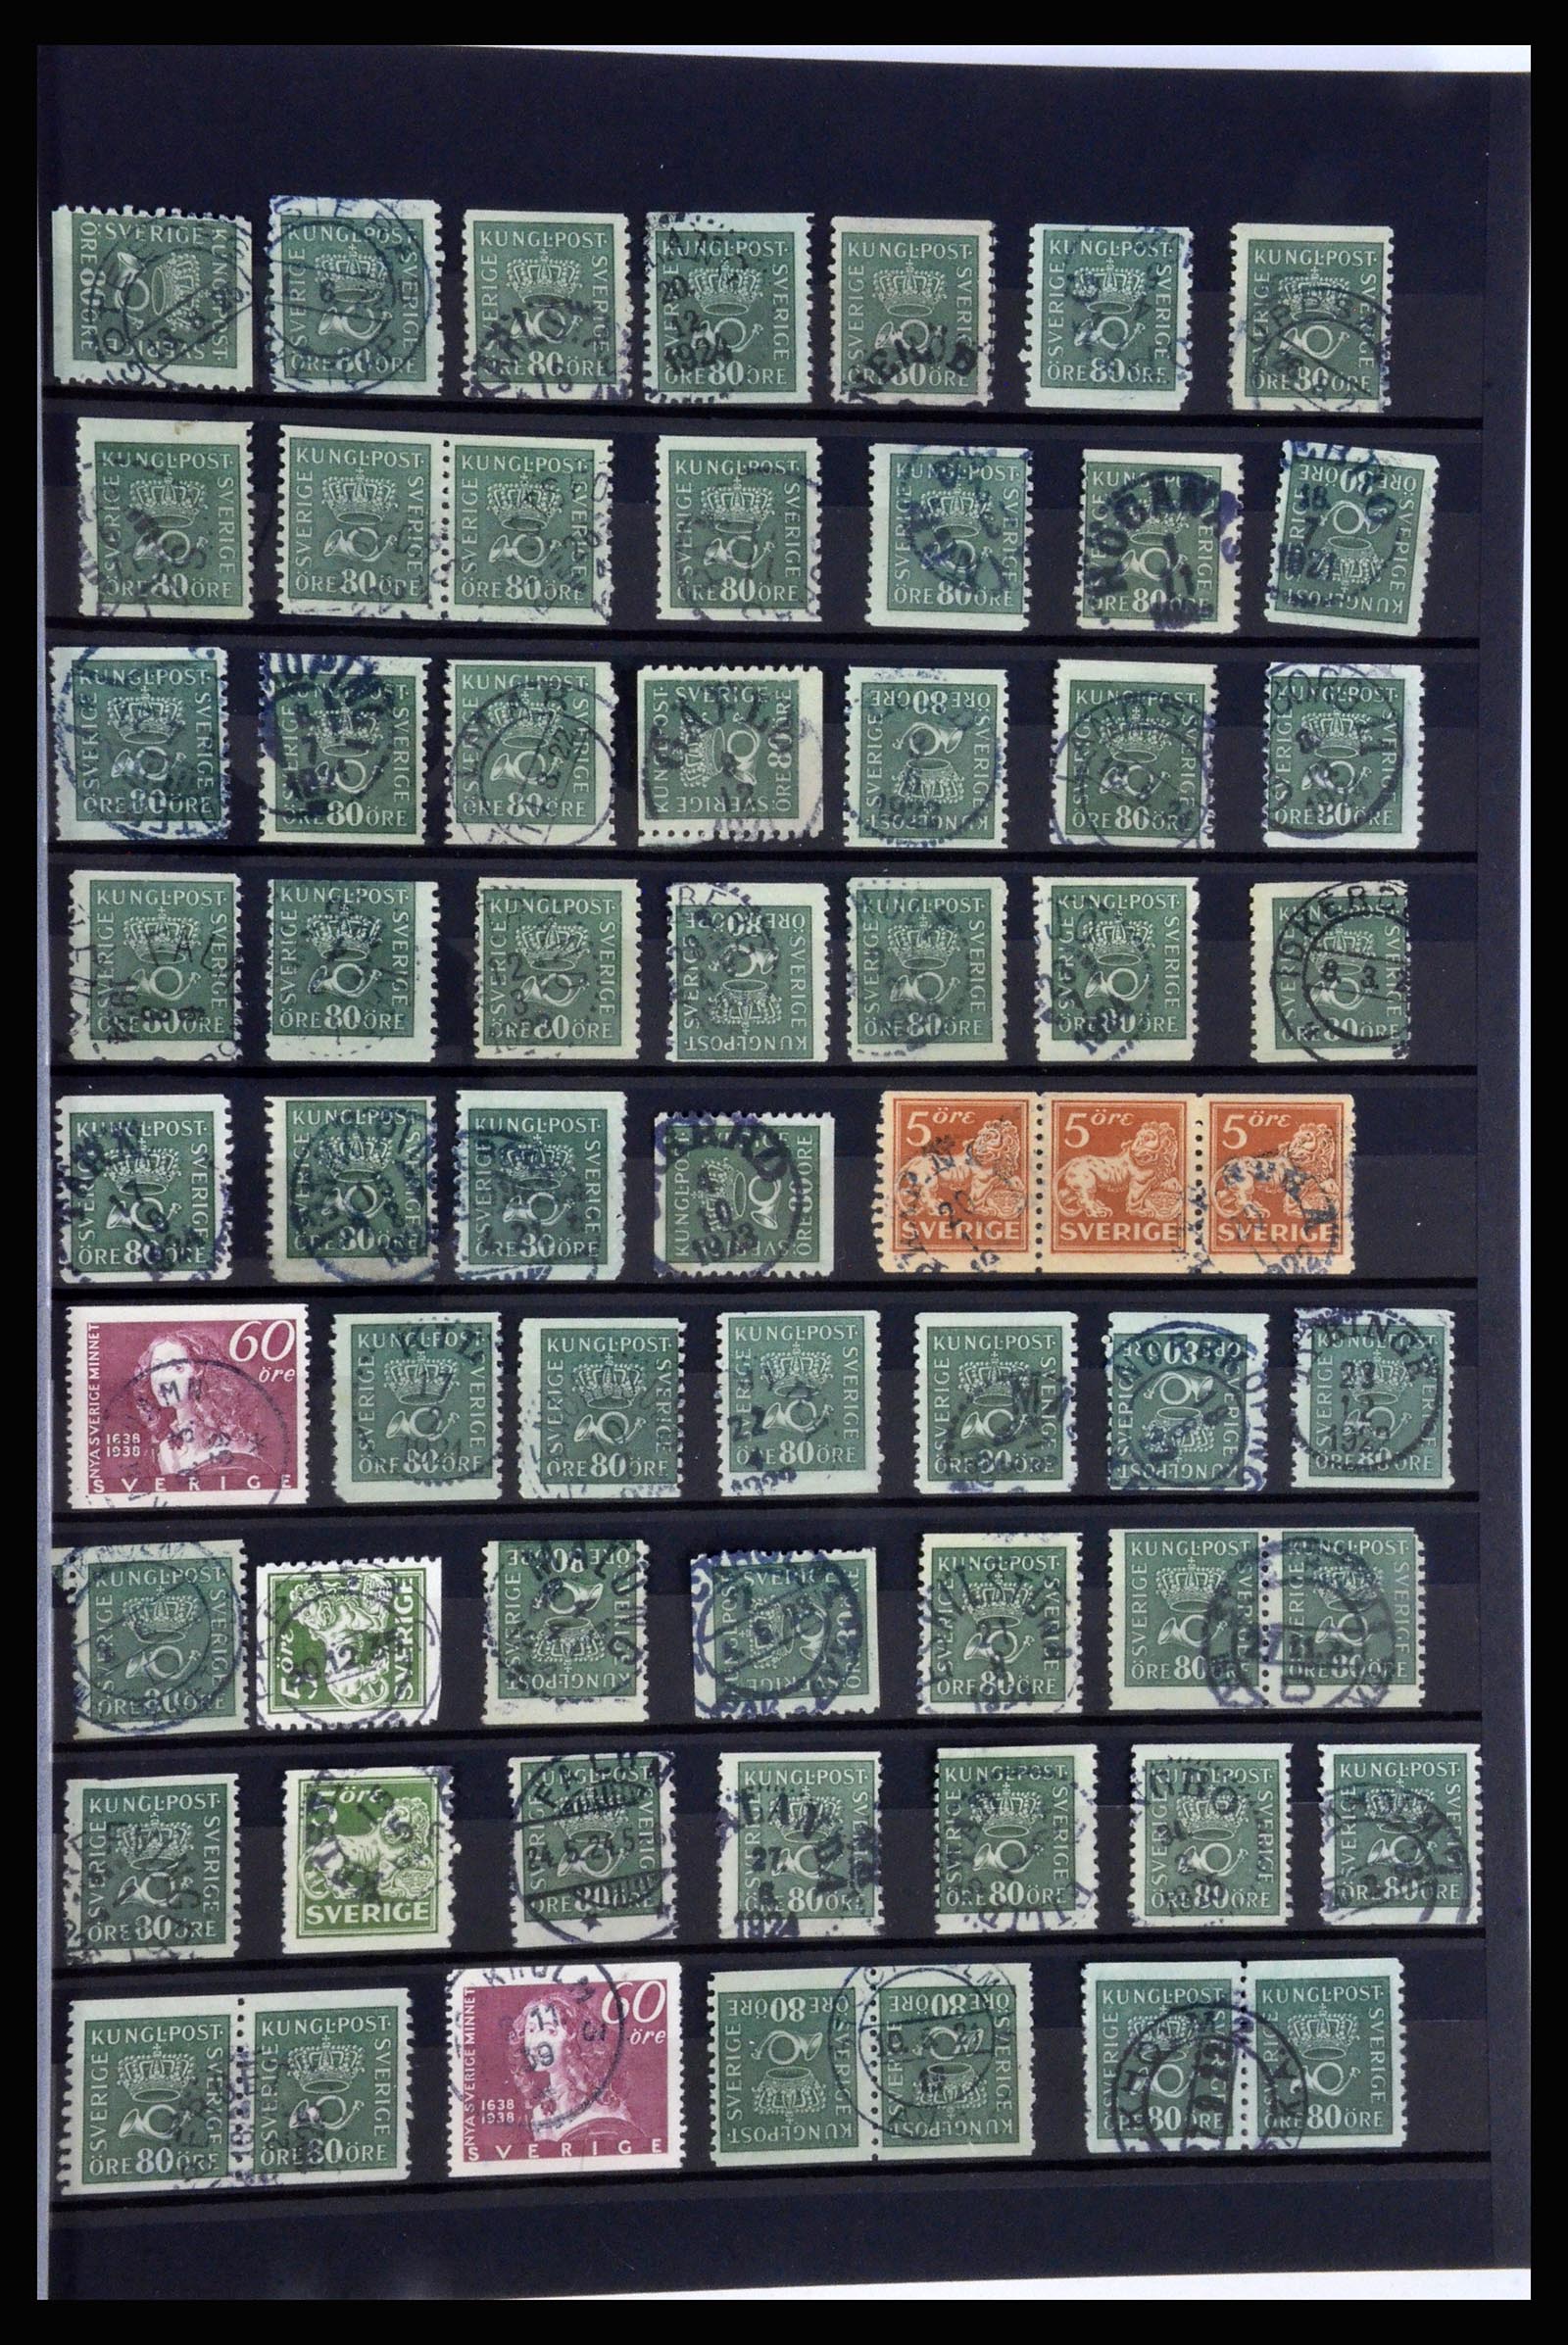 36316 009 - Stamp collection 36316 Sweden cancellations 1920-1938.